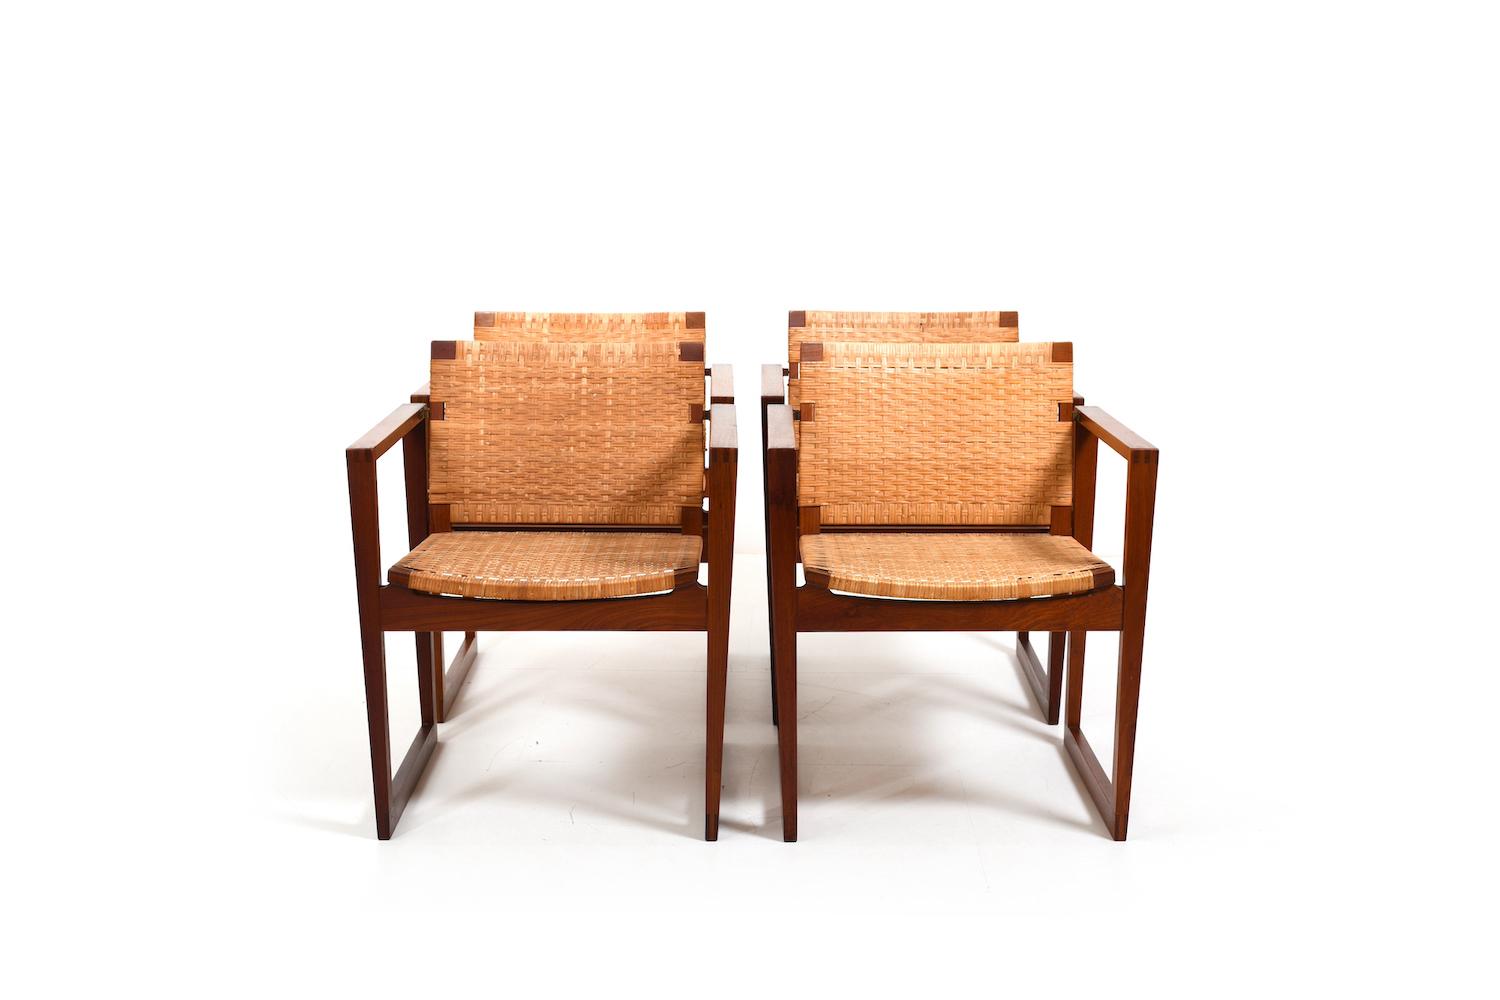 Rare Danish Teak and Cane Dining Set 1960s For Sale 7